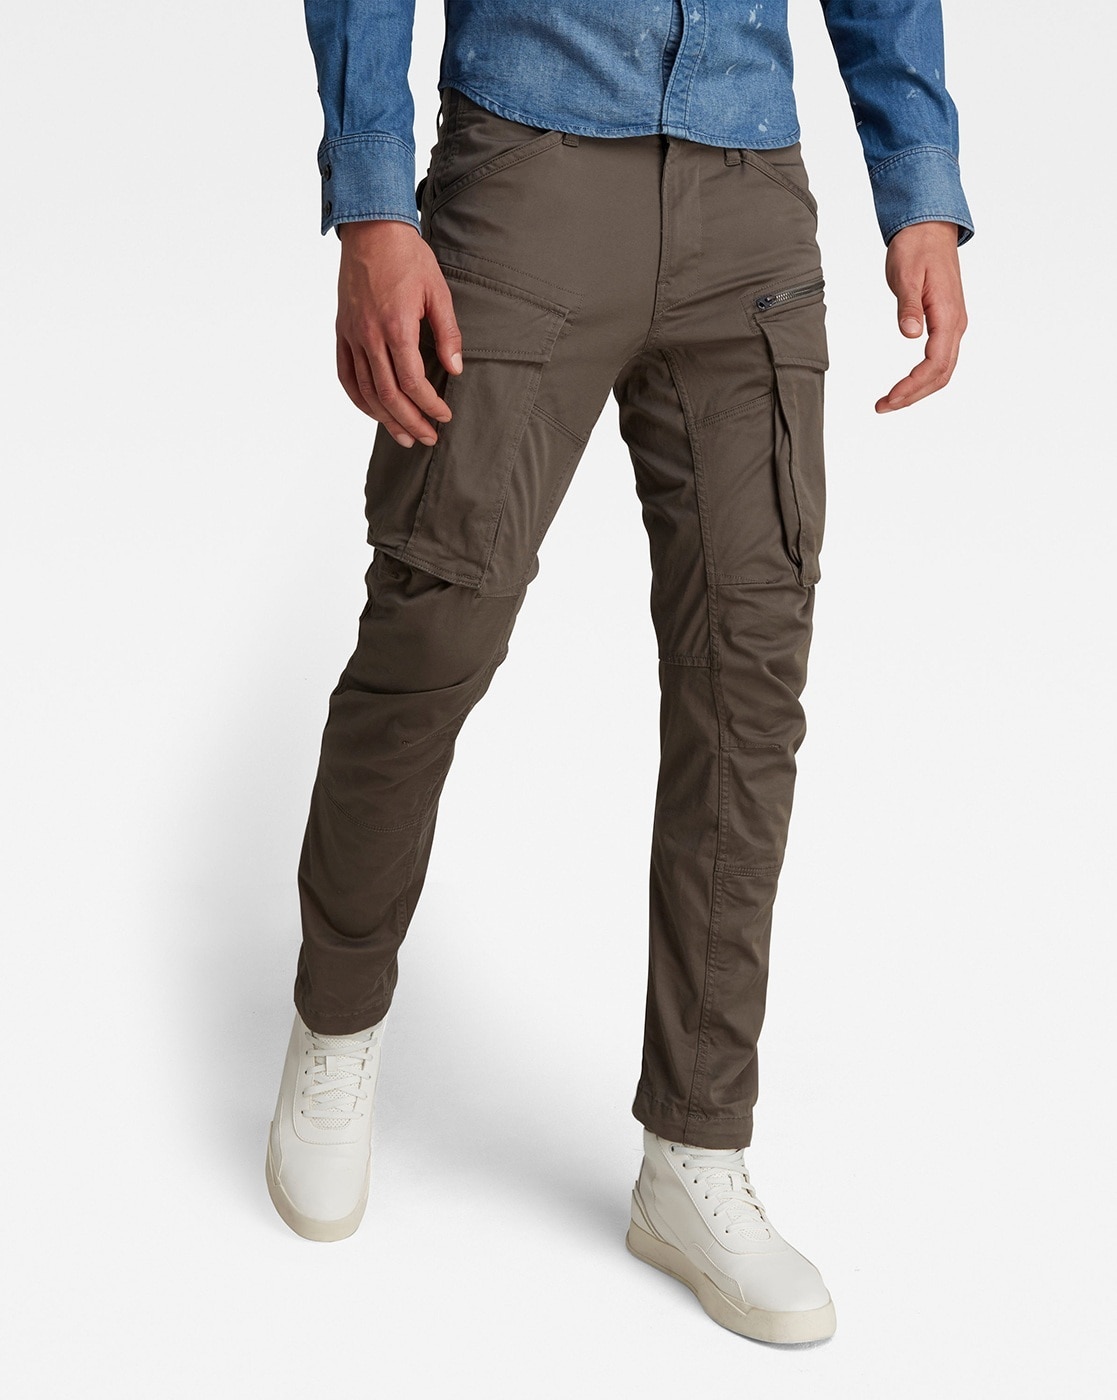 G-STAR RAW Mens Rovic Zip 3D Tapered Cargo Pant | Casual school outfits, Cargo  pant, G-star